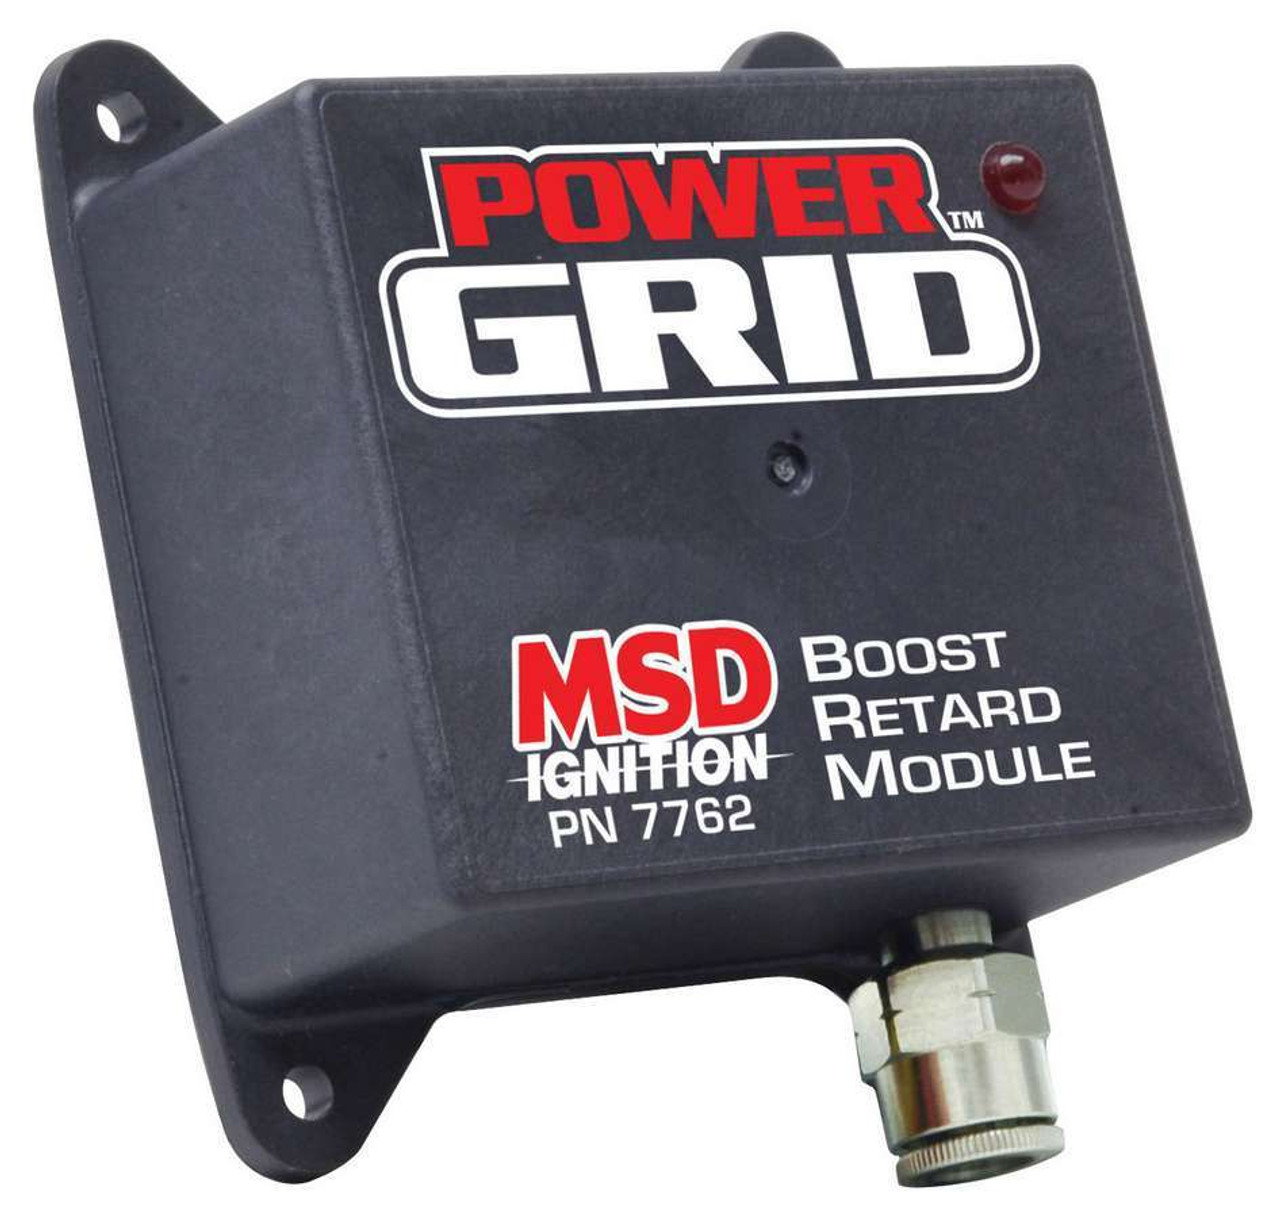 MSD Ignition Boost Retard Module for Power Grid